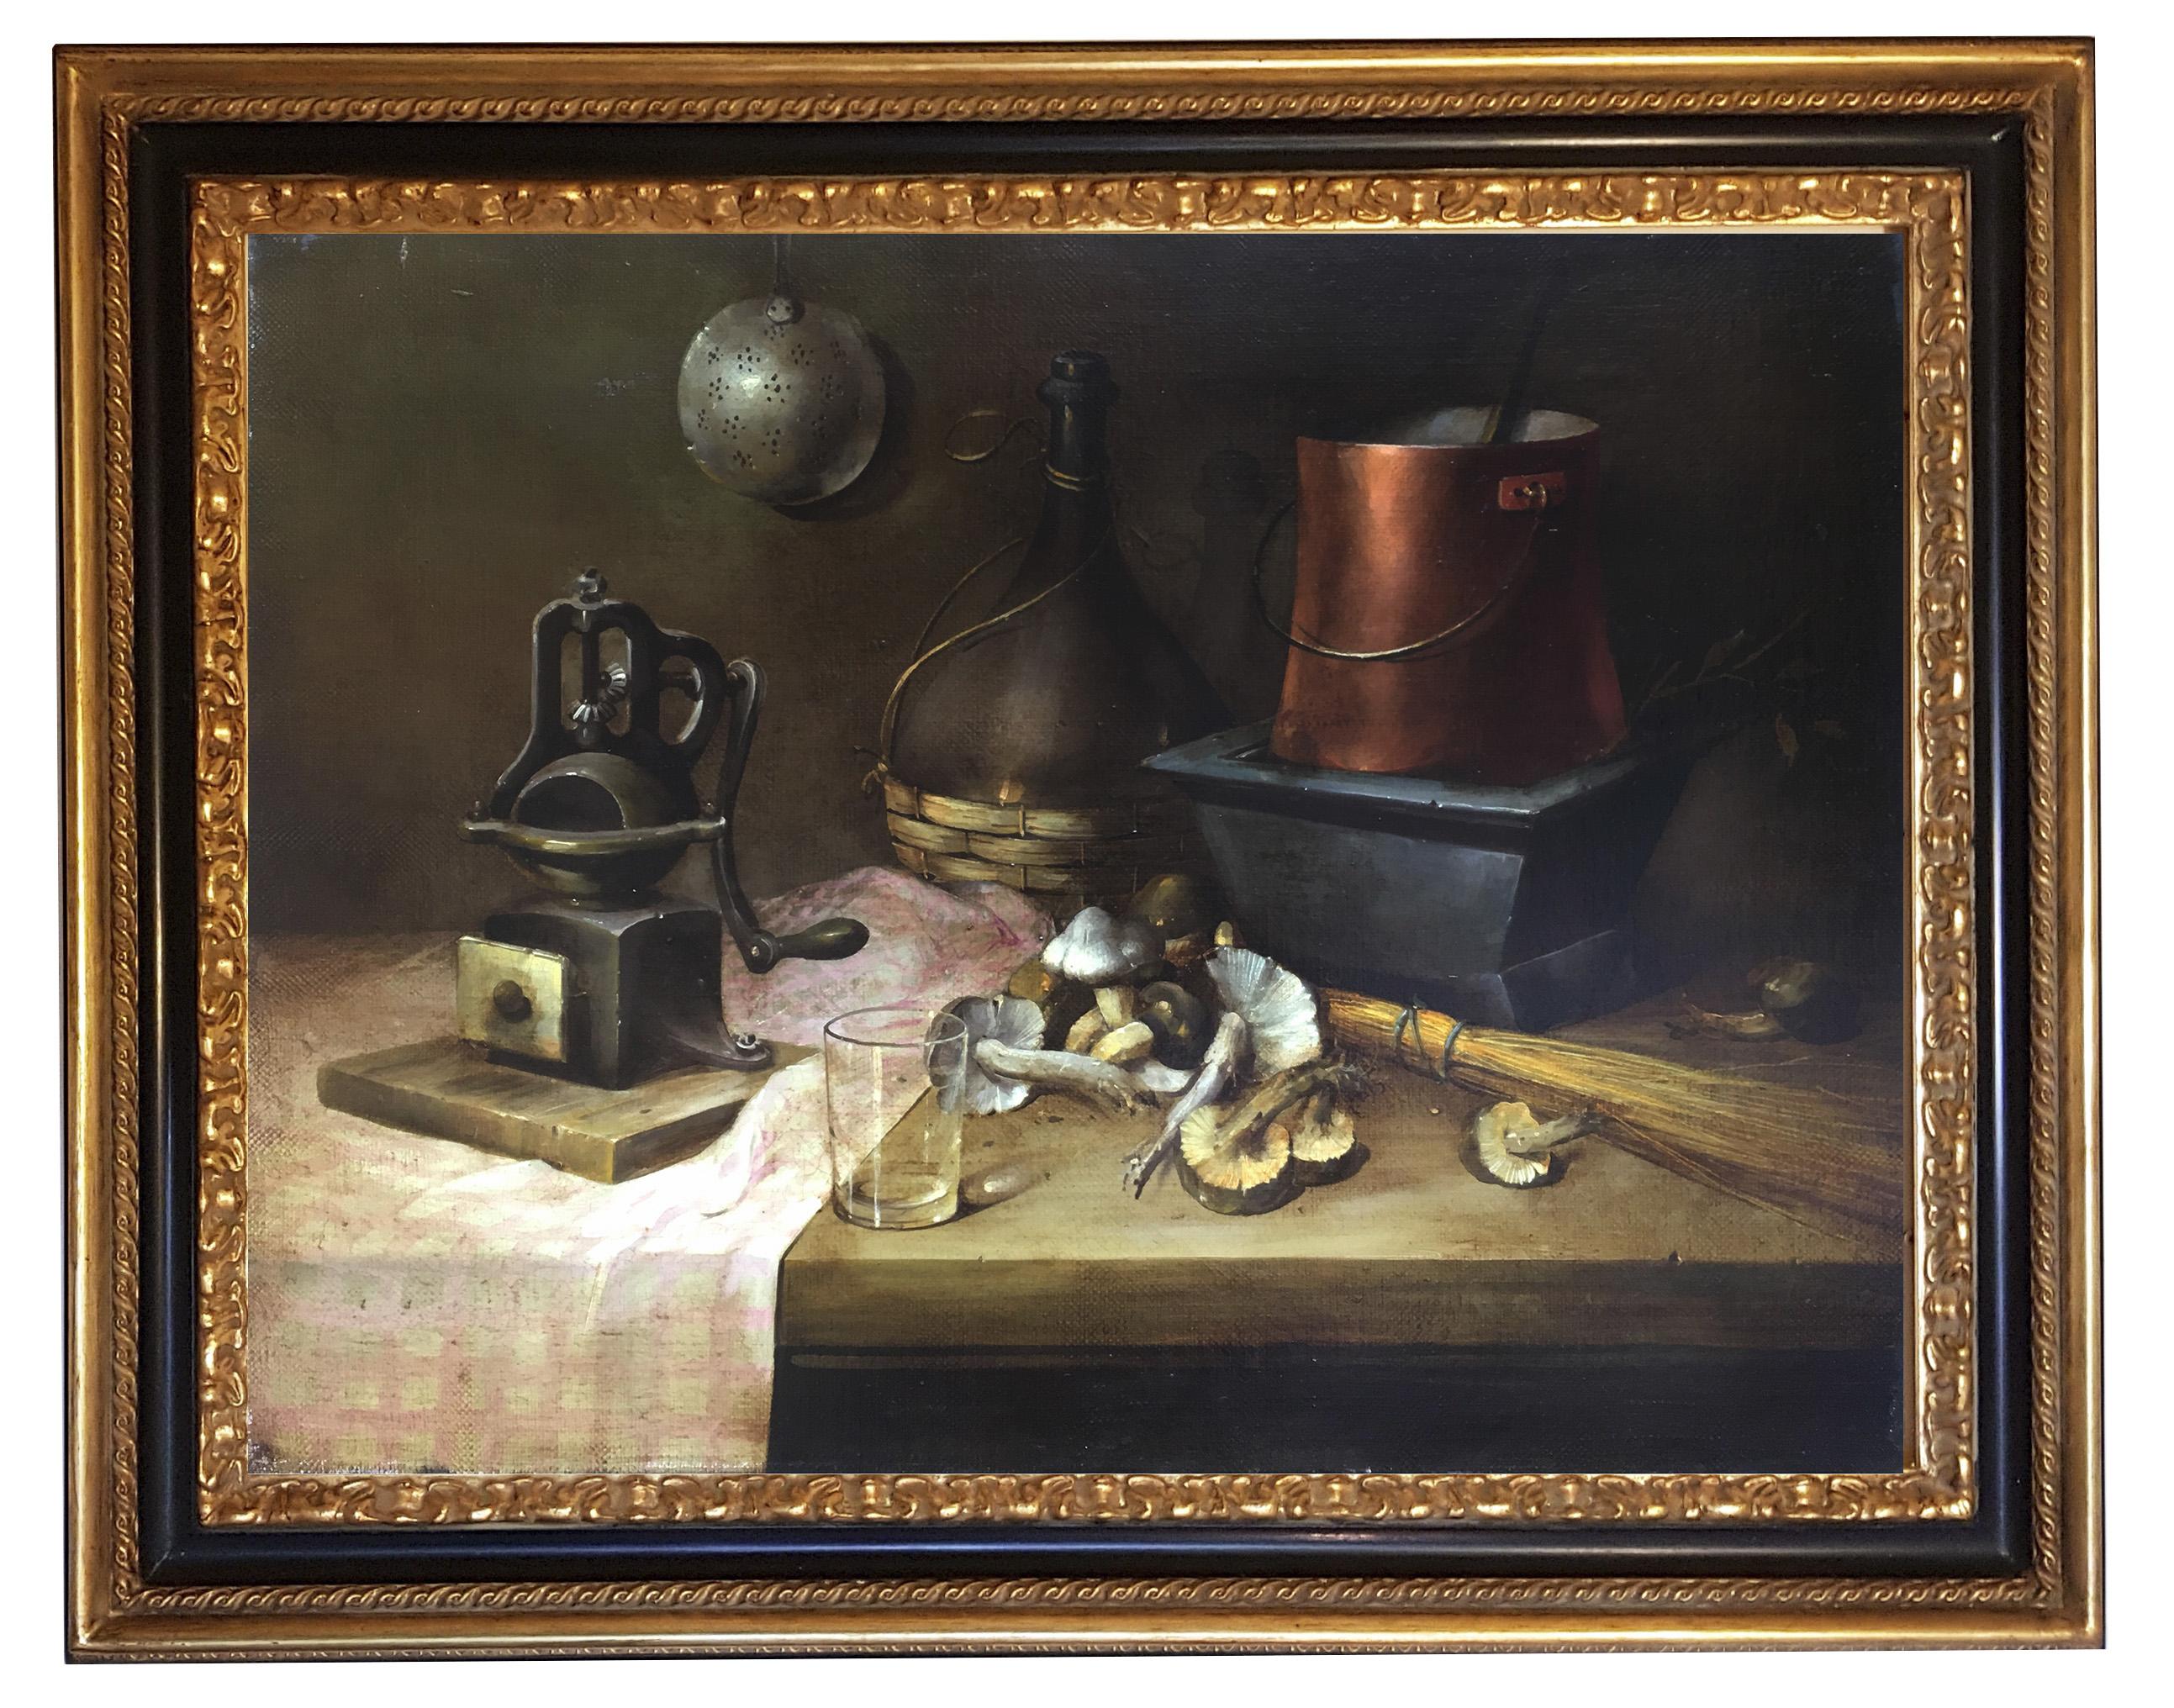 STILL LIFE - Oil on canvas cm.60x80 by Salvatore Marinelli, Italy 2002
Frame available on request from our workshop.